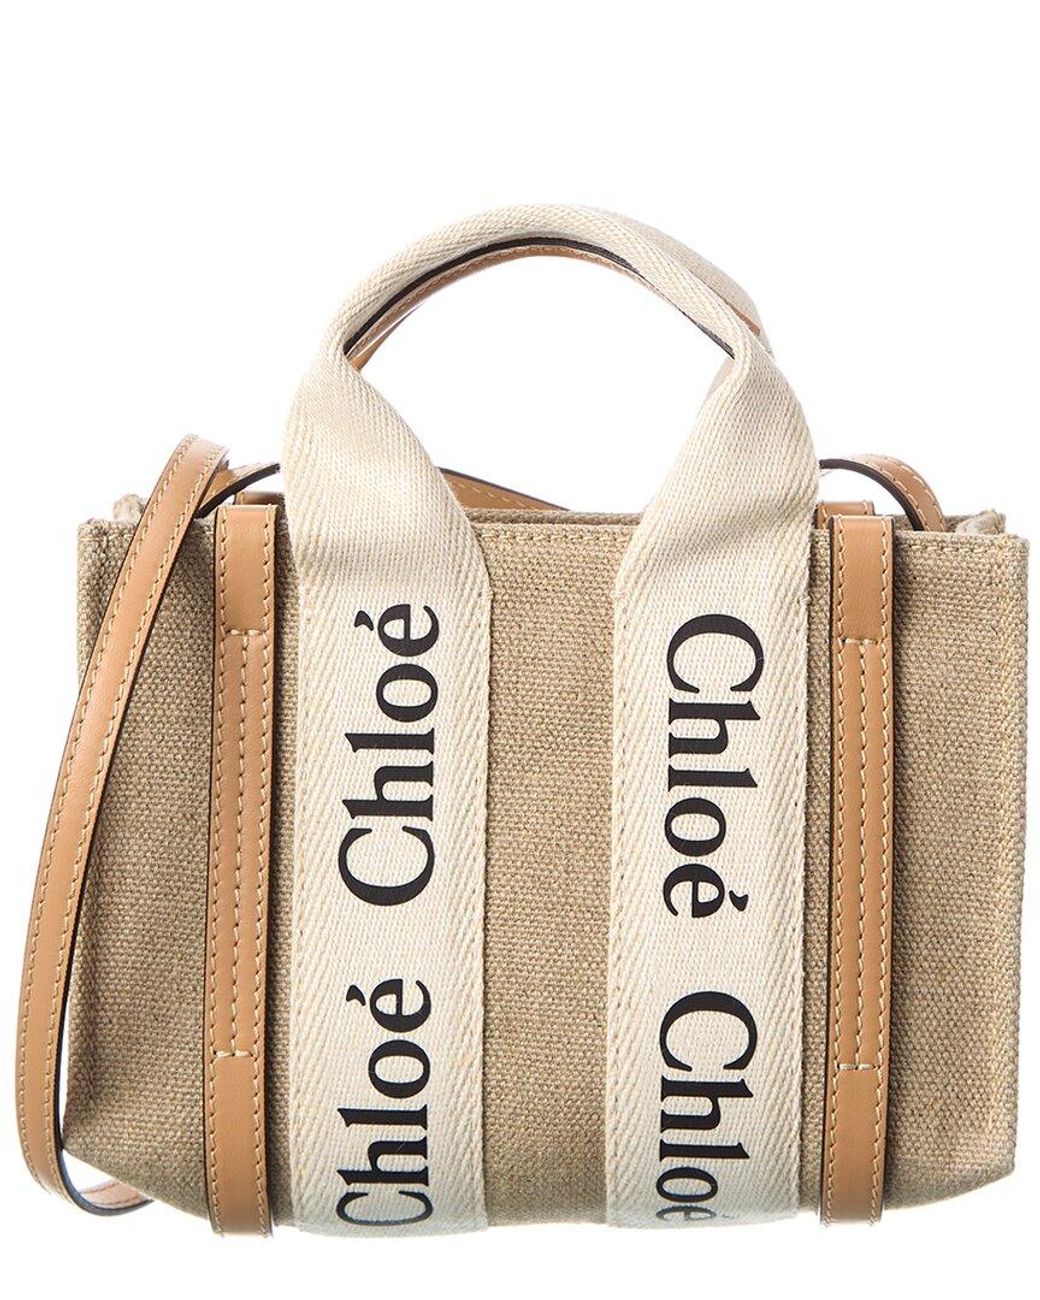 Chloé Woody Mini Canvas & Leather Tote in Natural | Lyst